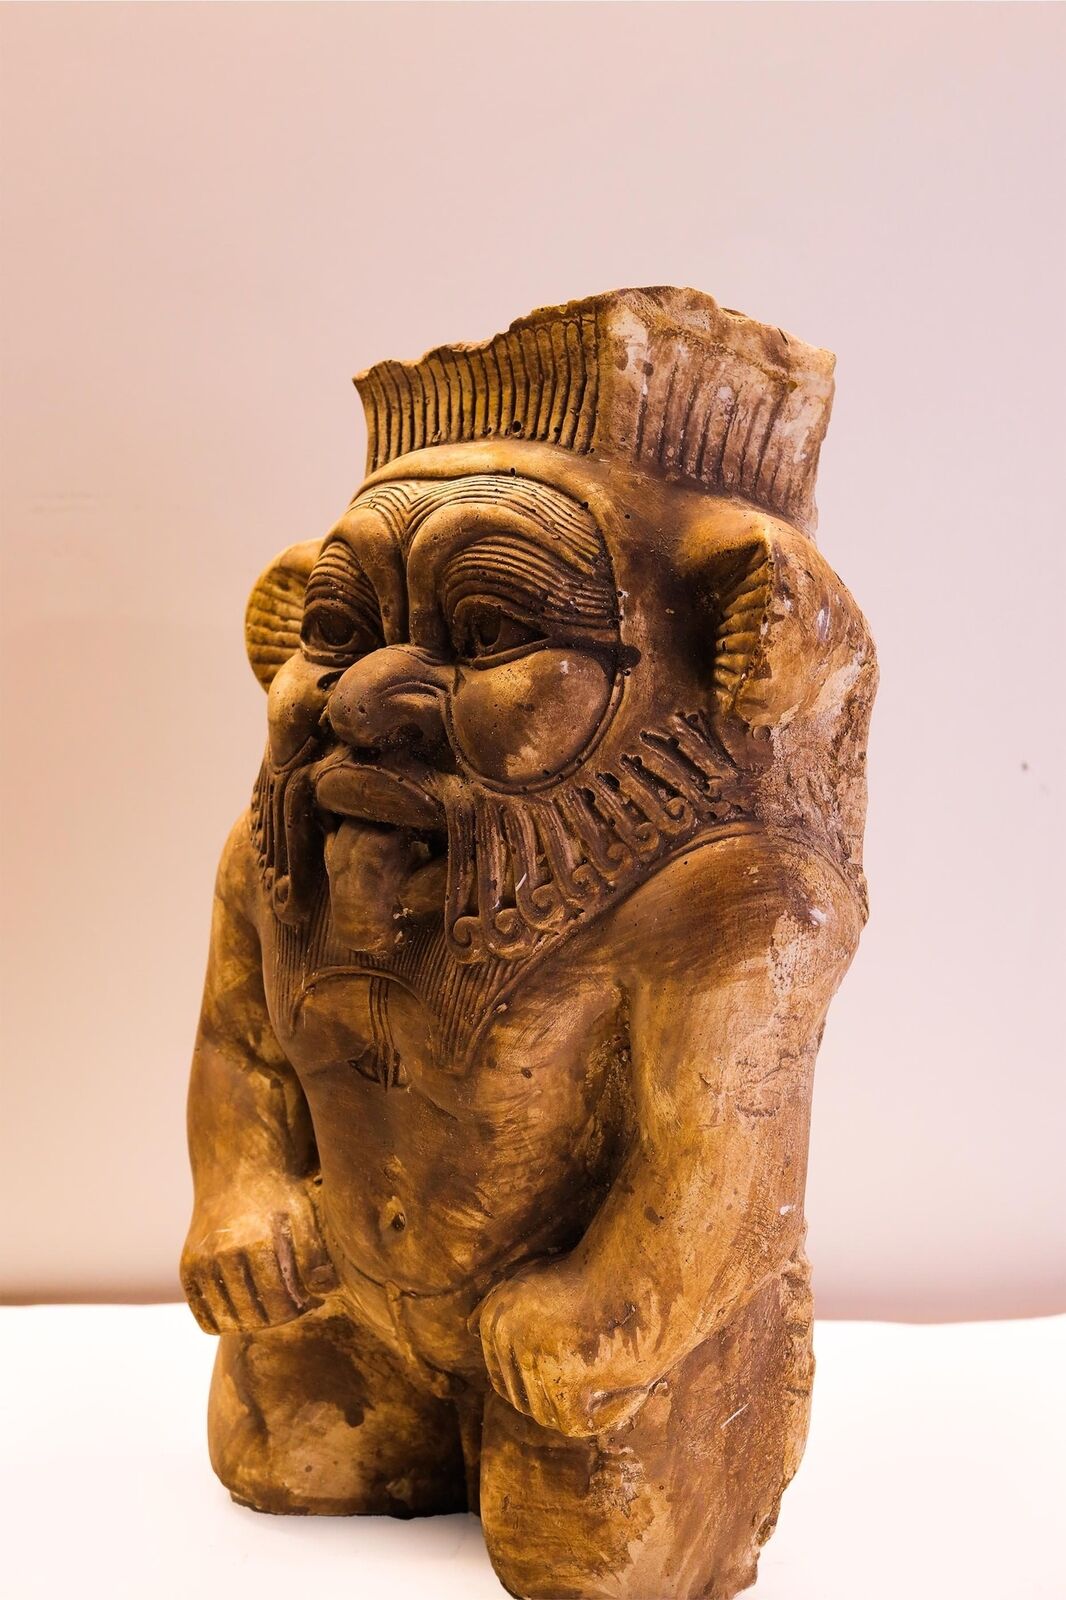 Unique statue of The Egyptian God Bes, Bes statue for sale. Egyptian Bes